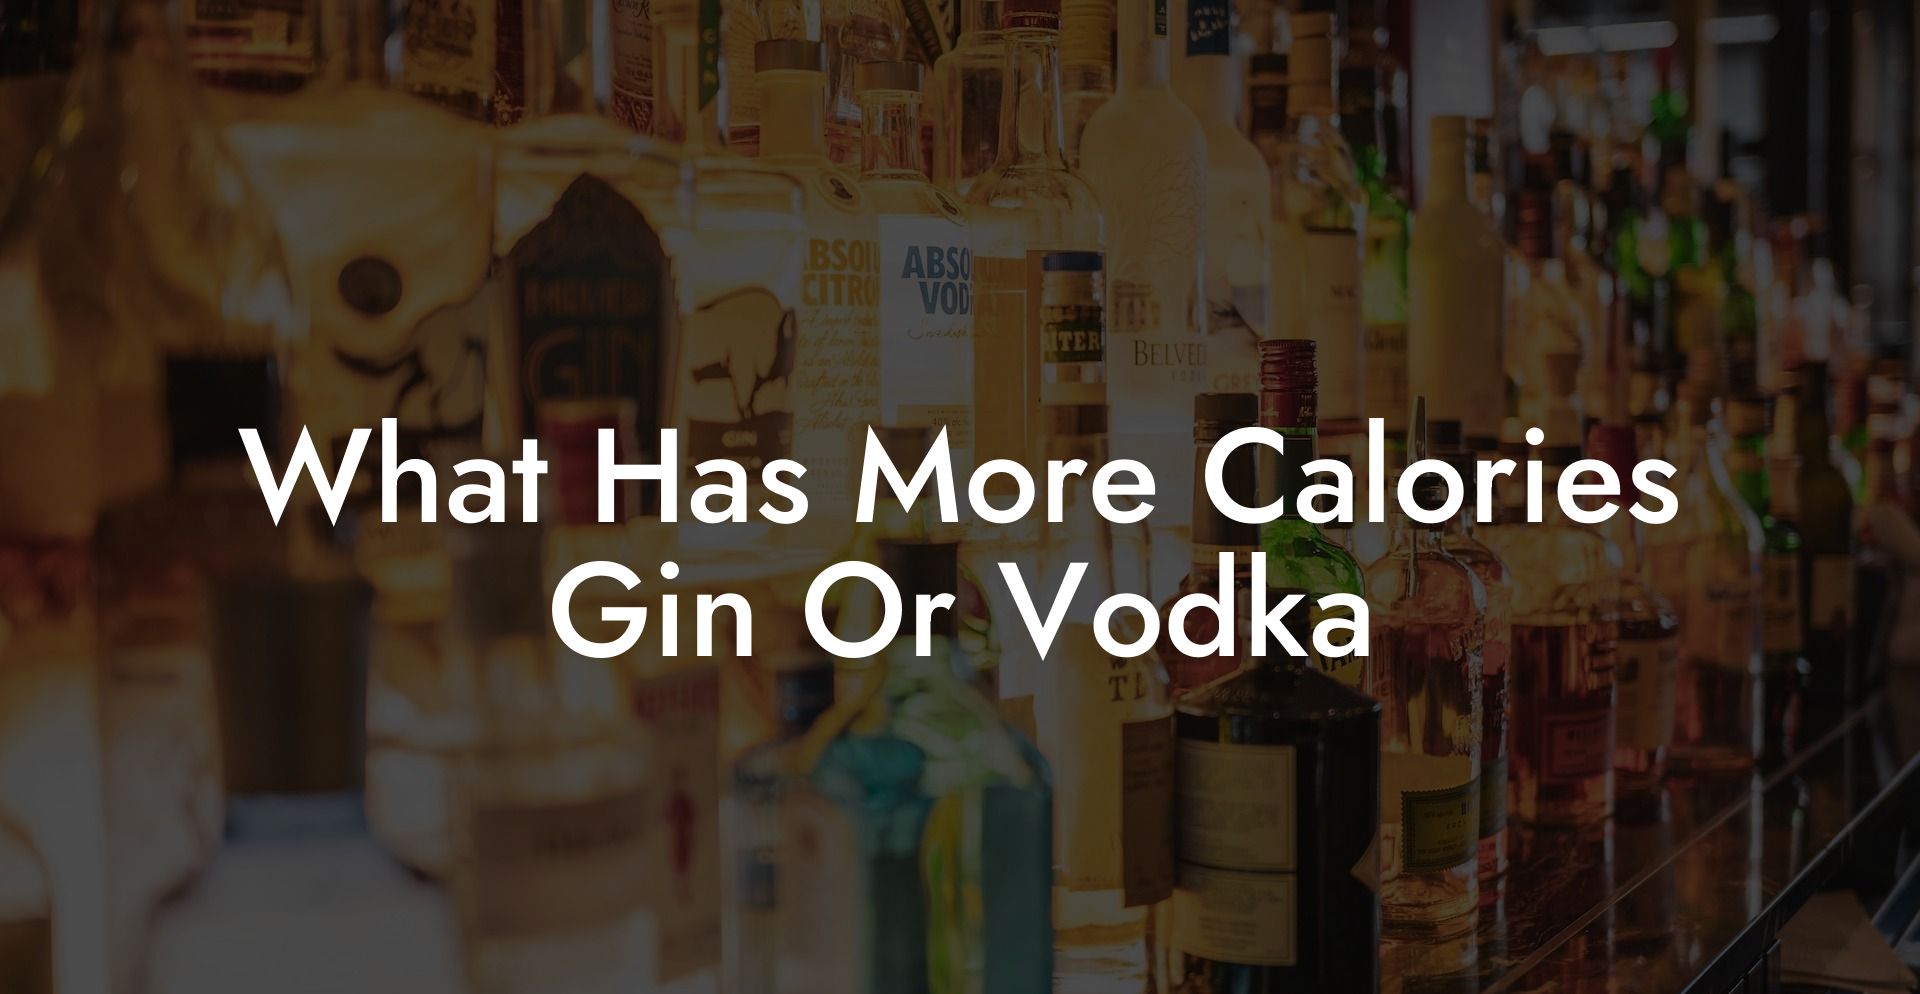 What Has More Calories Gin Or Vodka